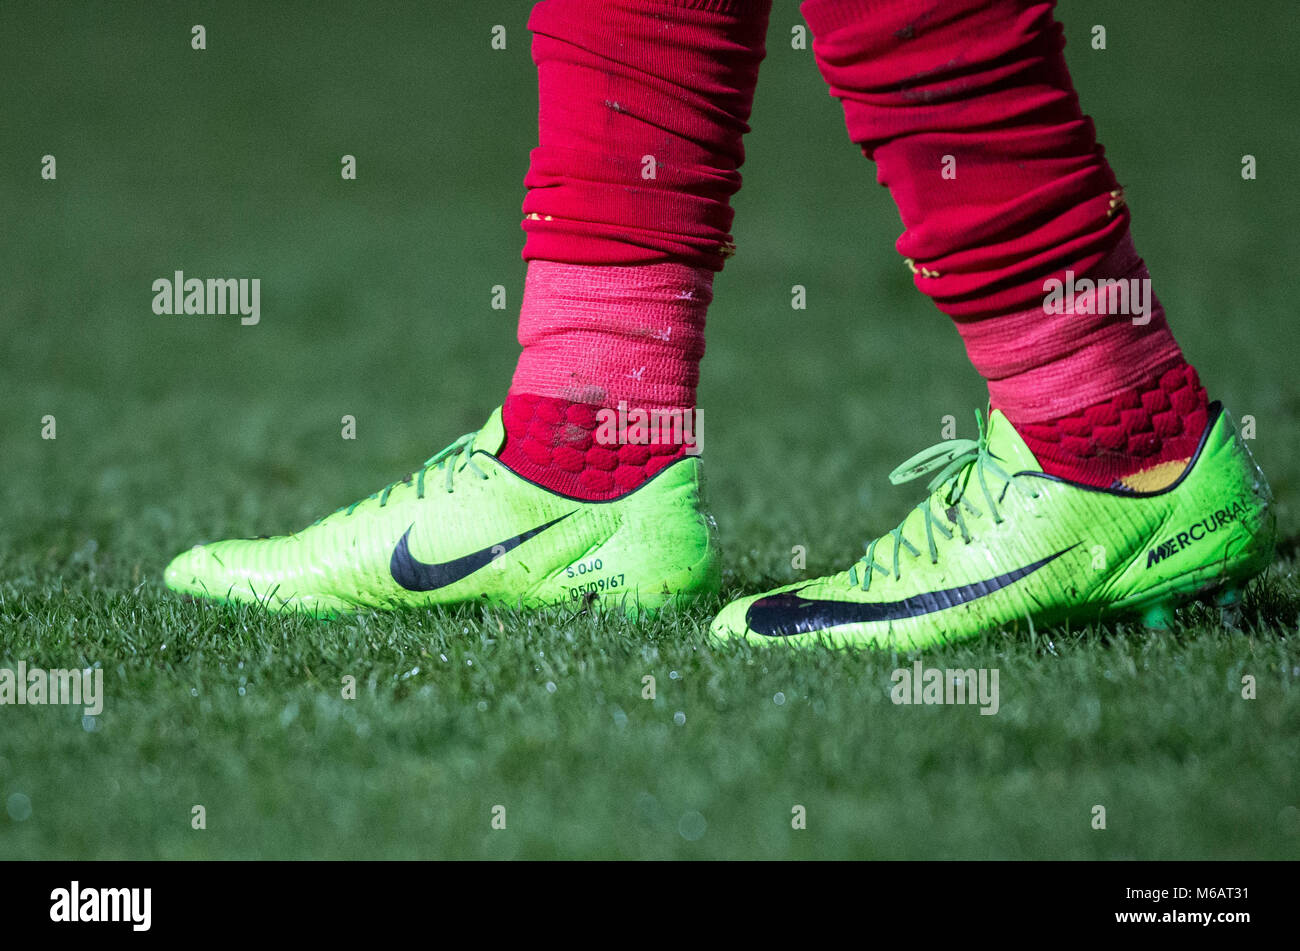 football boots with name printed on